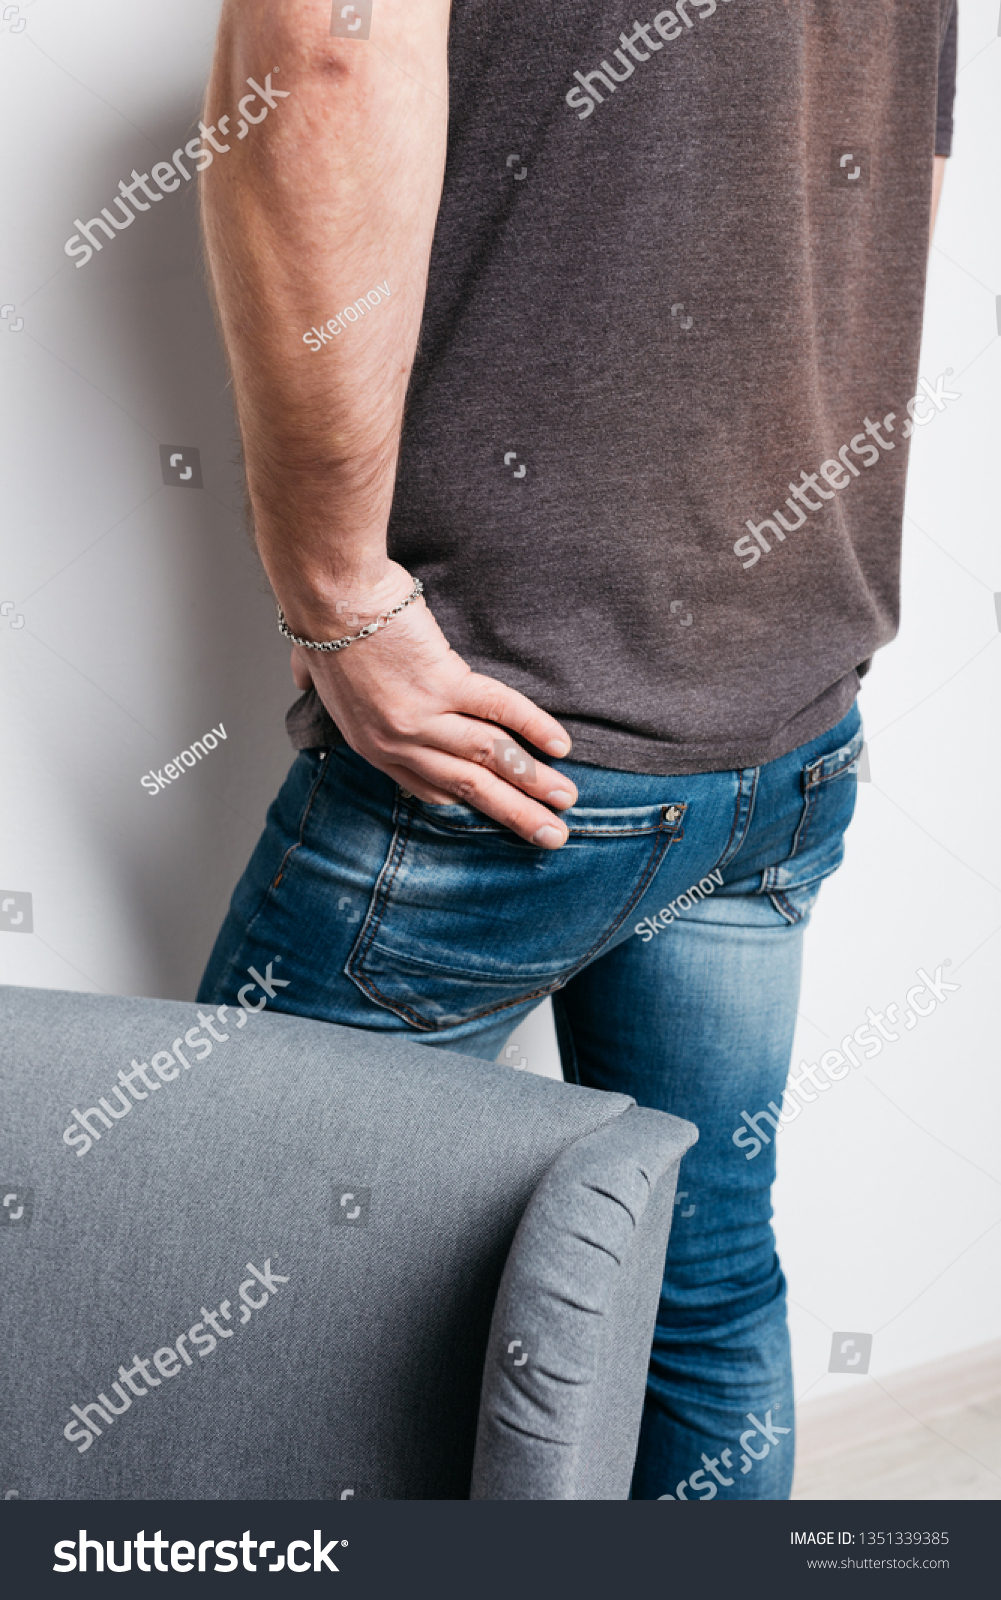 boys in tight jeans